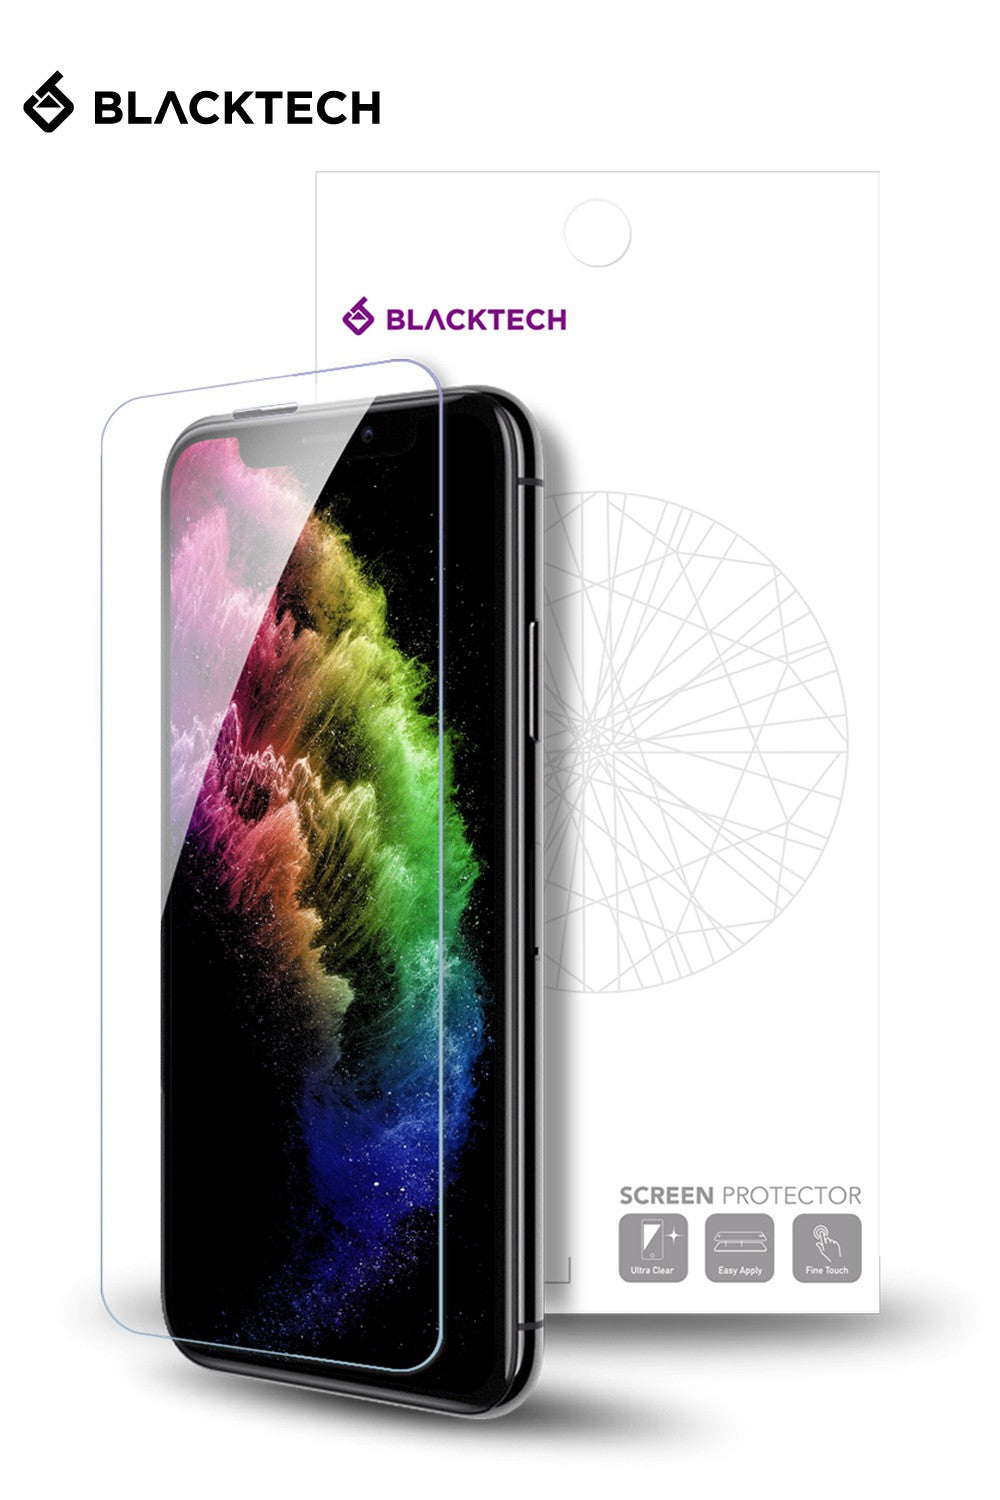 Blacktech iPhone 12 Pro Max Screen Protector